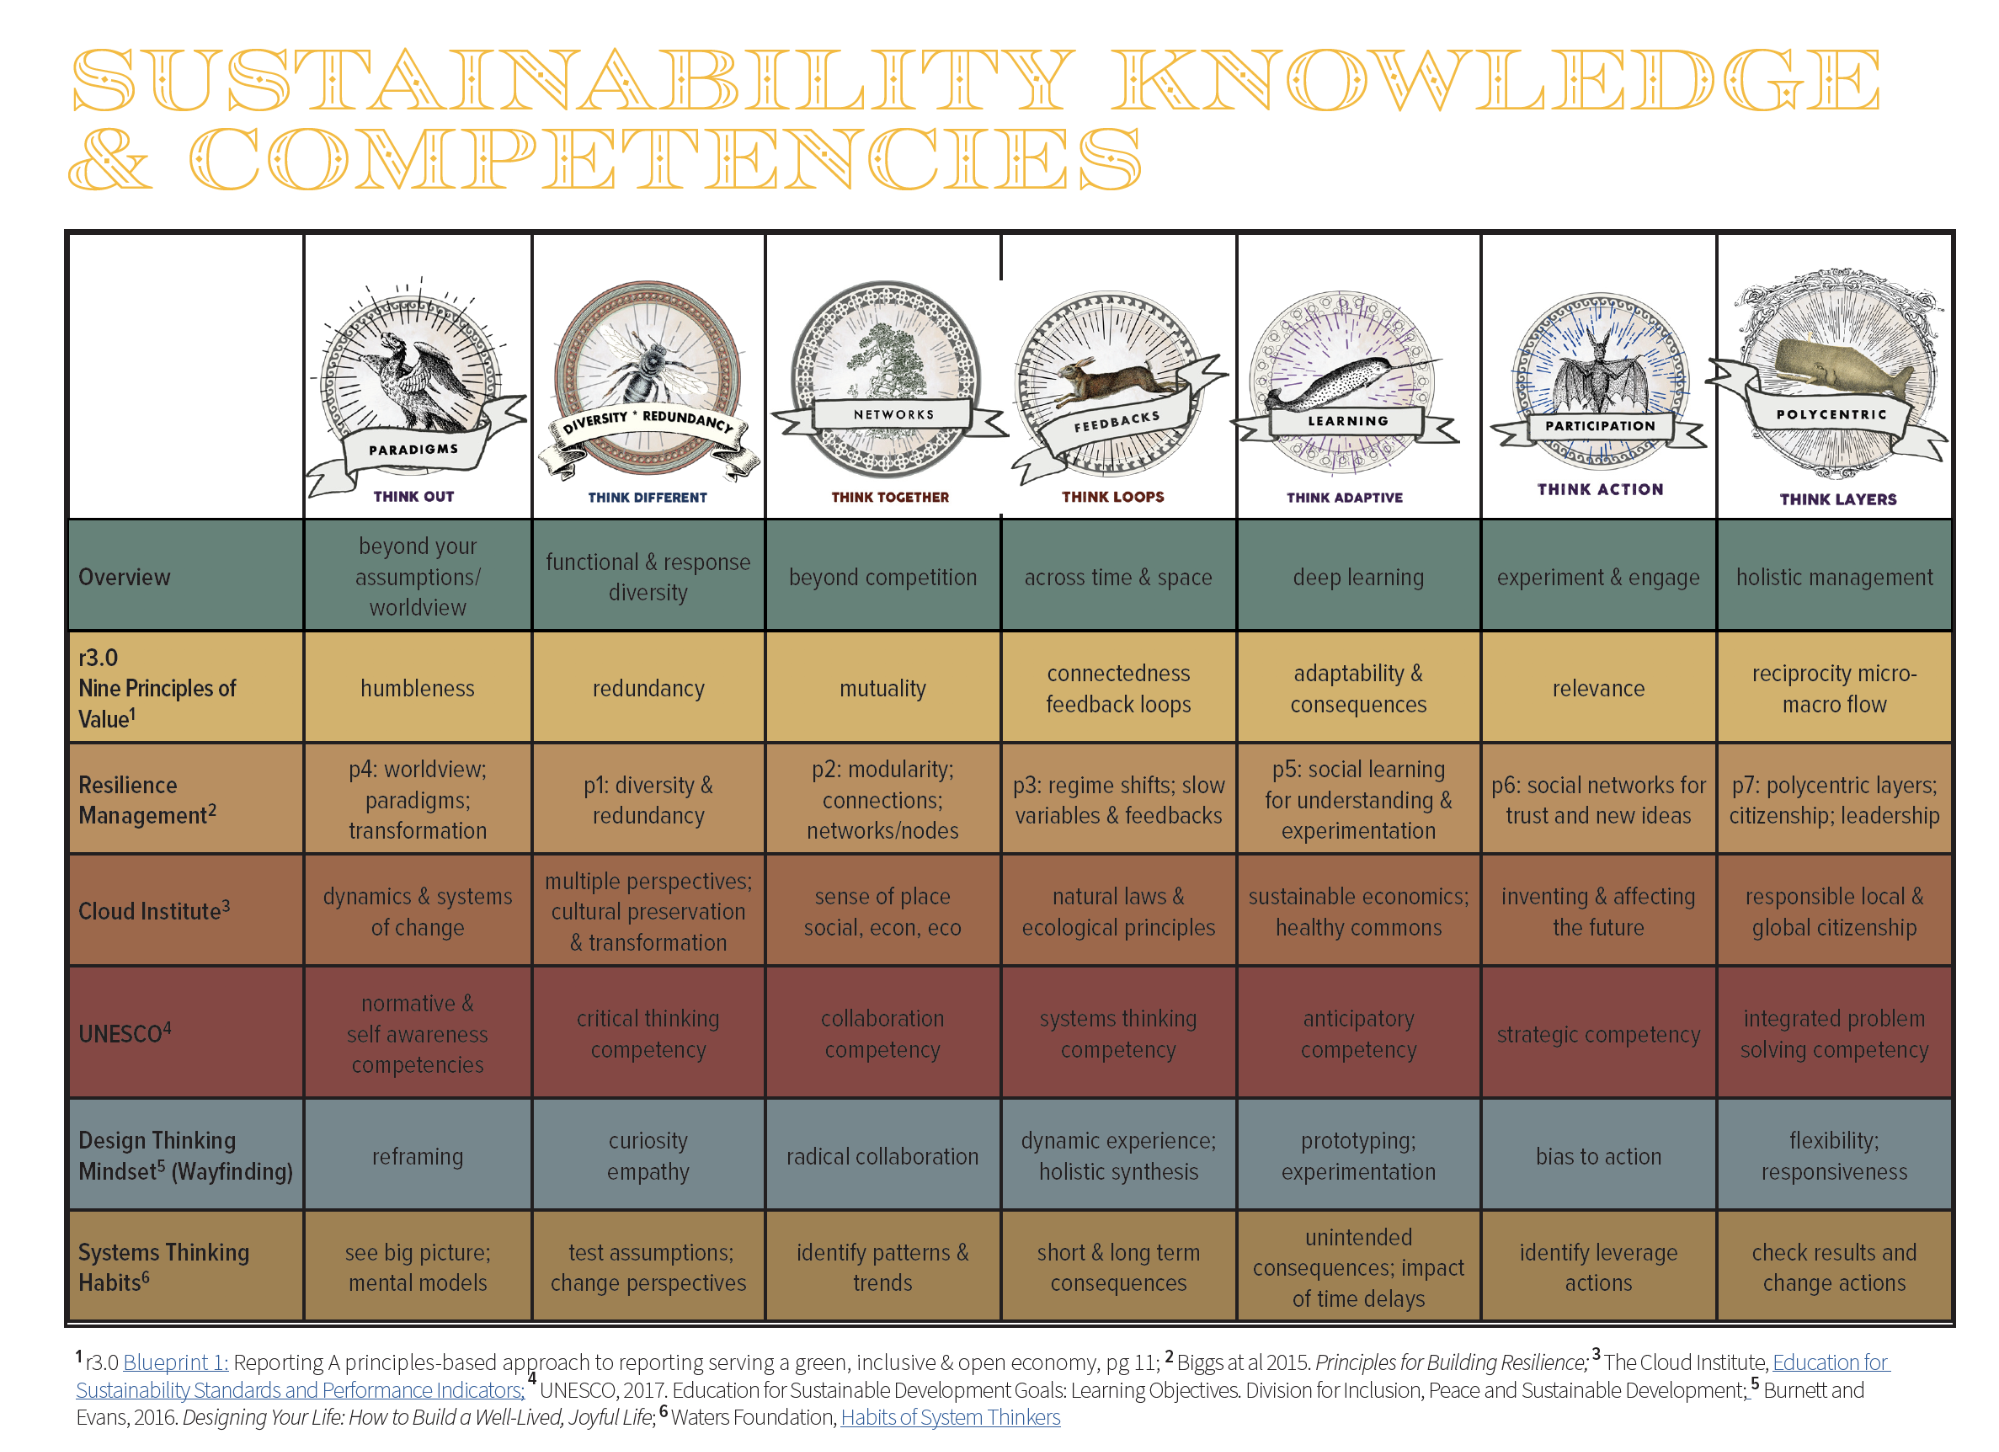 A table of sustainability knowledge and competencies, compiled from core teachings.